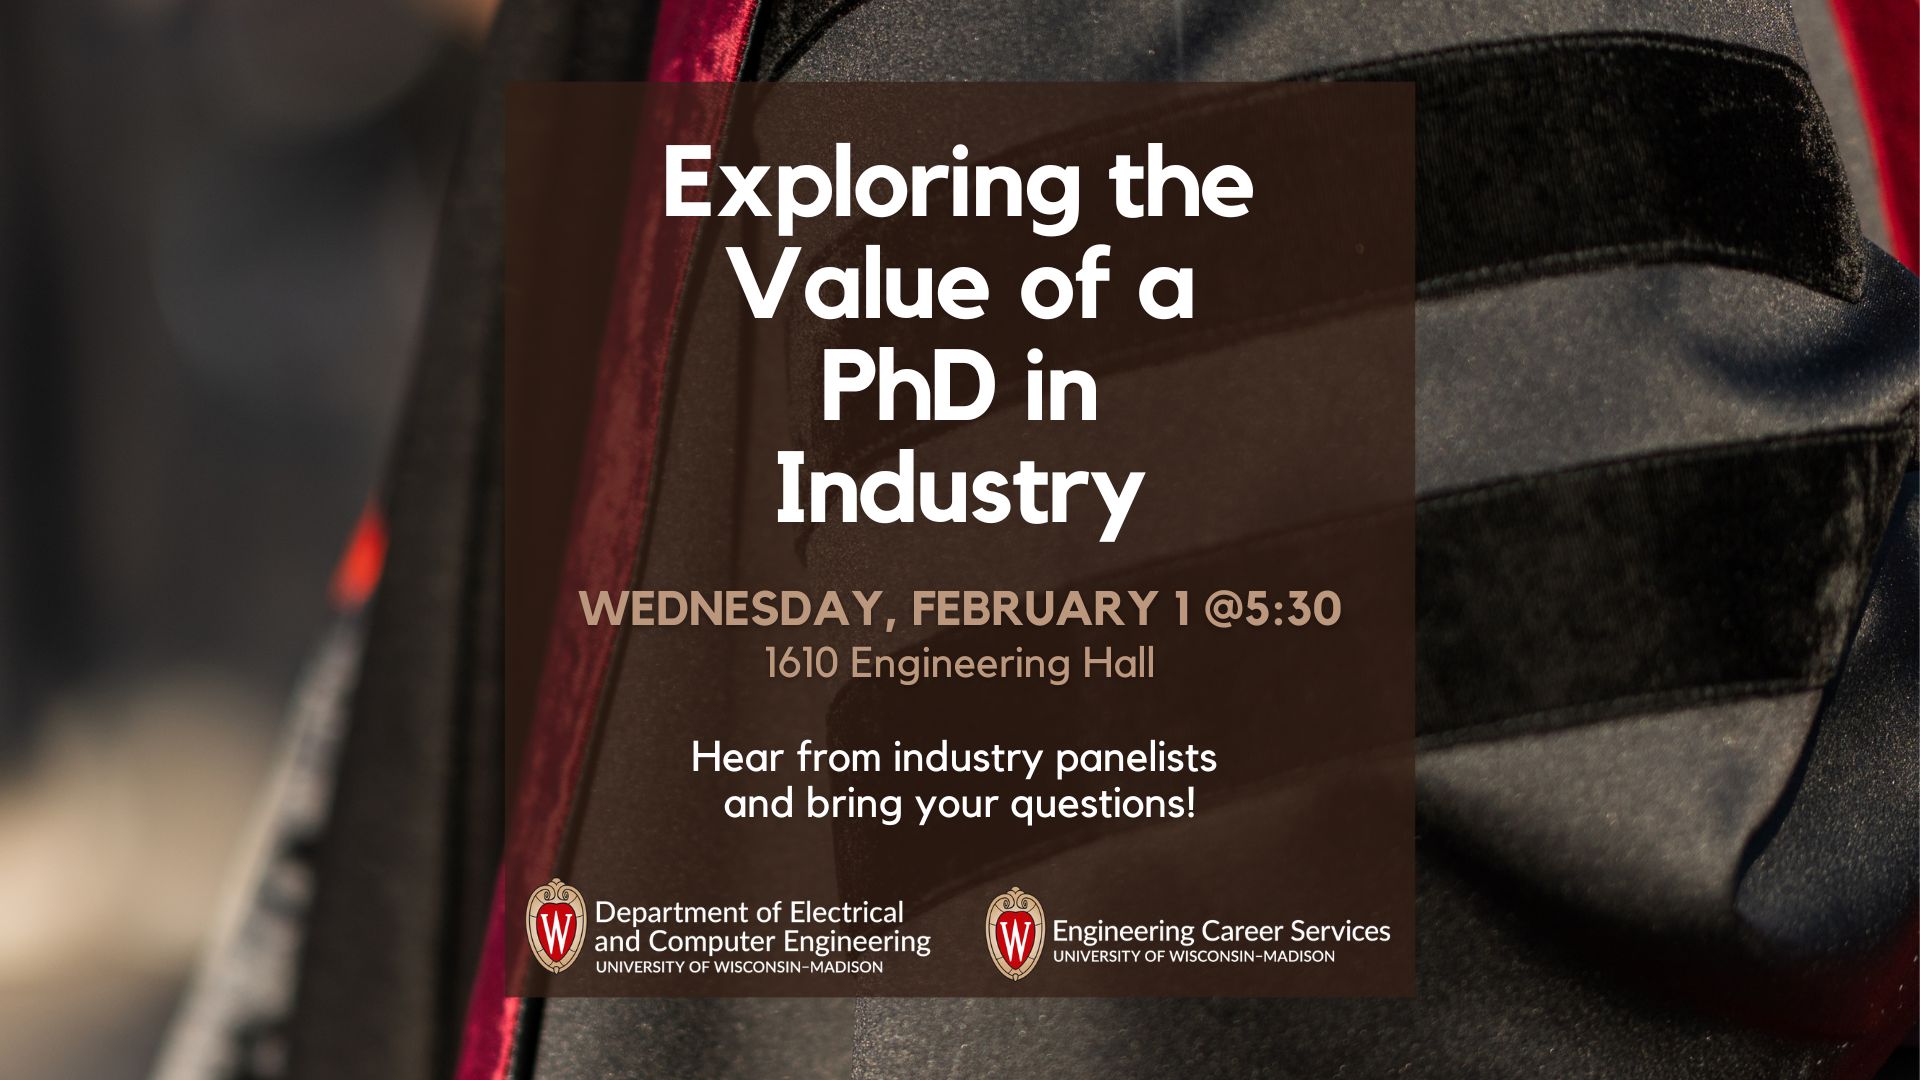 Photo of PhD graduation robe with text: Exploring the Value of a PhD in Industry, Wednesday, February 1 @ 5:30, 1610 Engineering Hall, Hear from industry panelists and bring your questions! Department of Electrical and Computer Engineering, Engineering Career Services